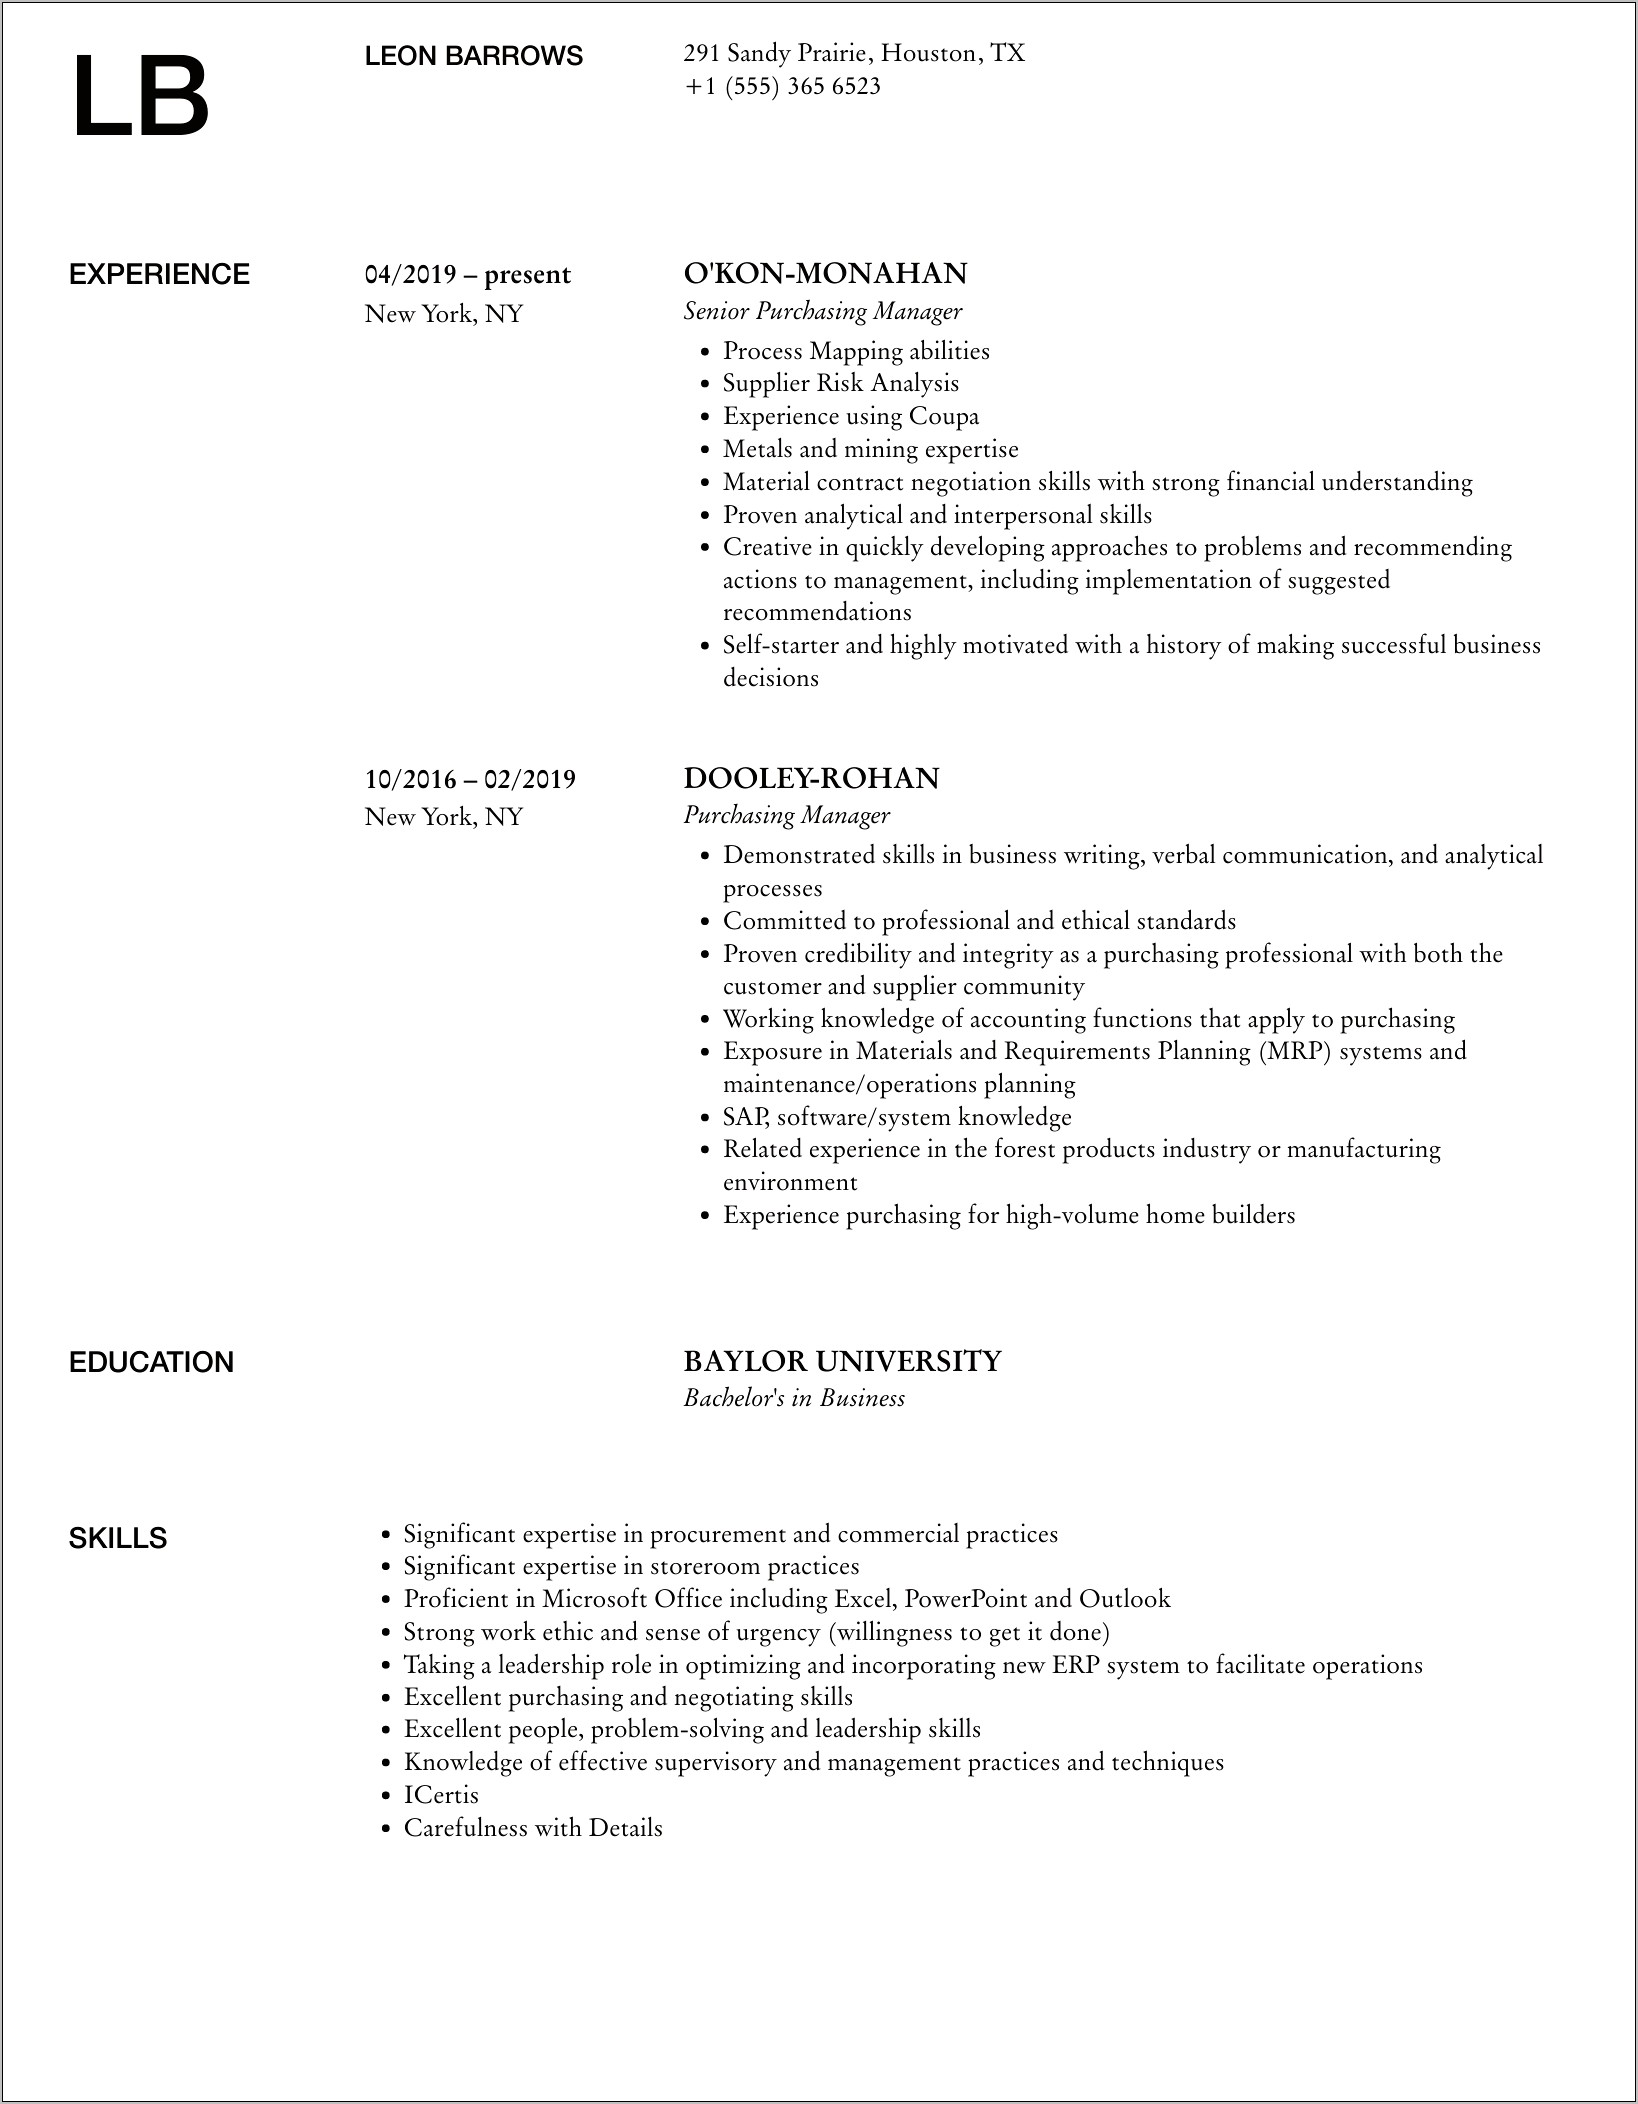 Free Resume Format Purchase Manager